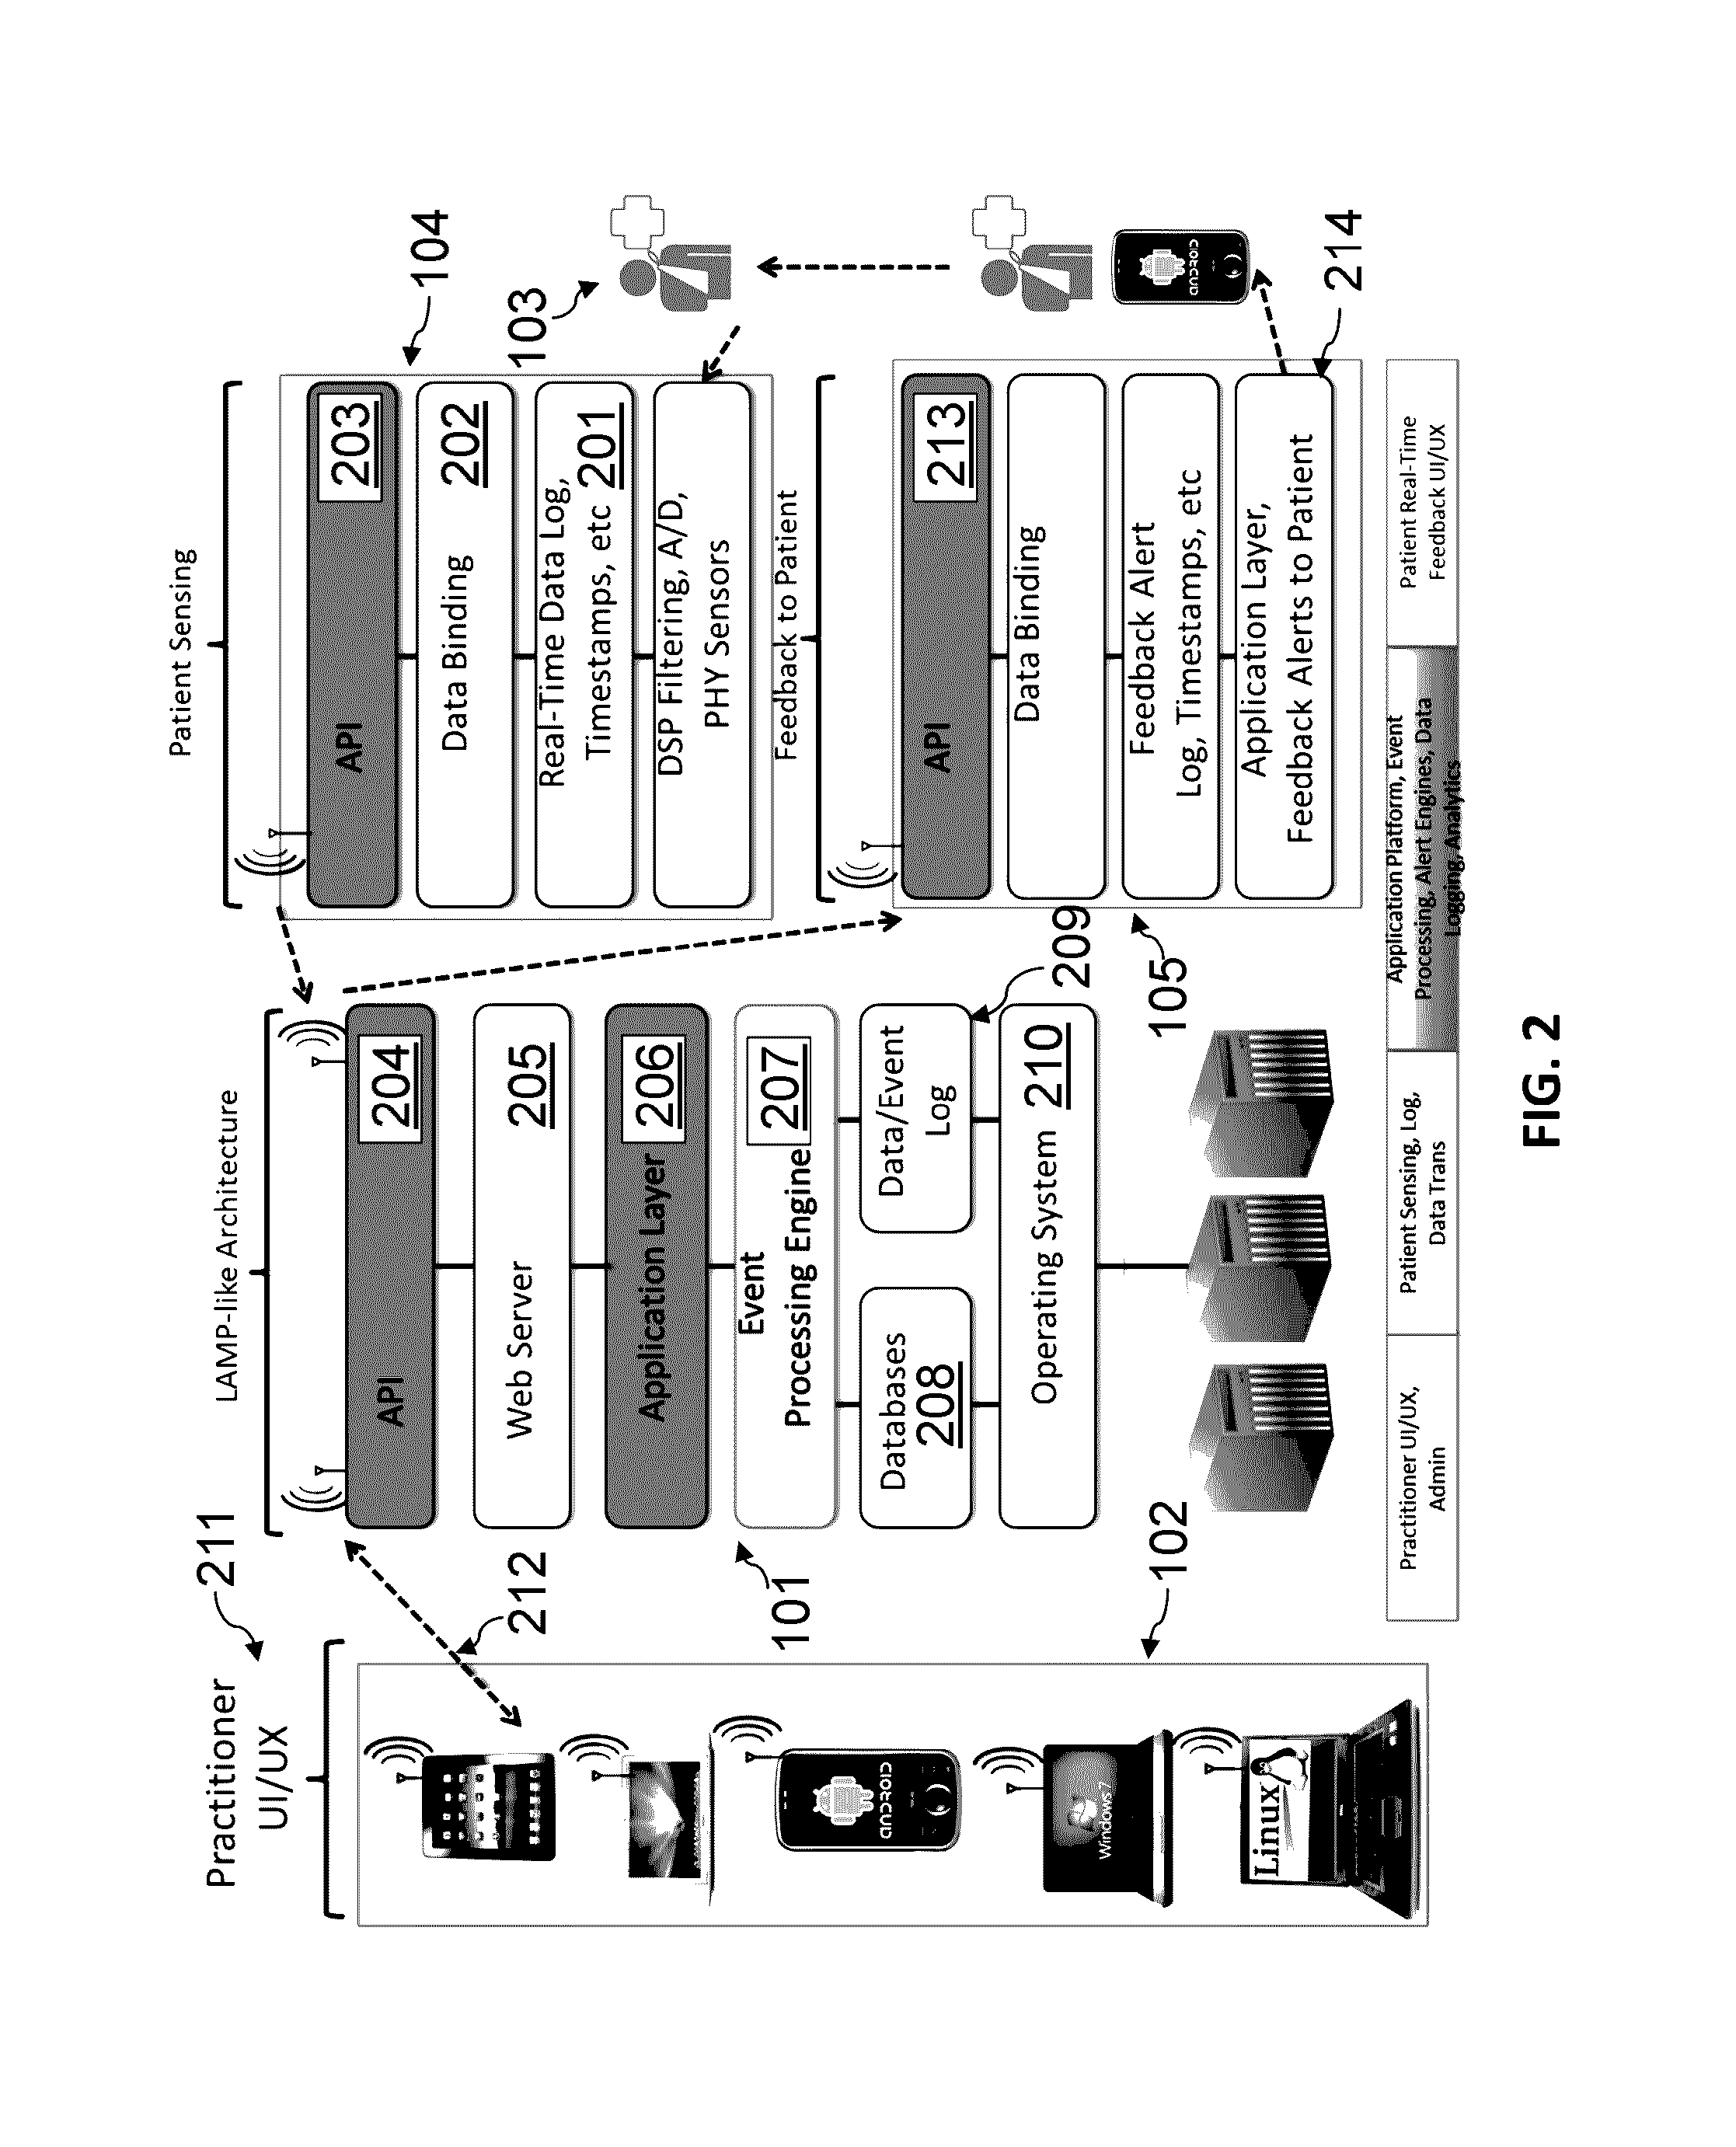 Location agnostic platform for medical condition monitoring and prediction and method of use thereof